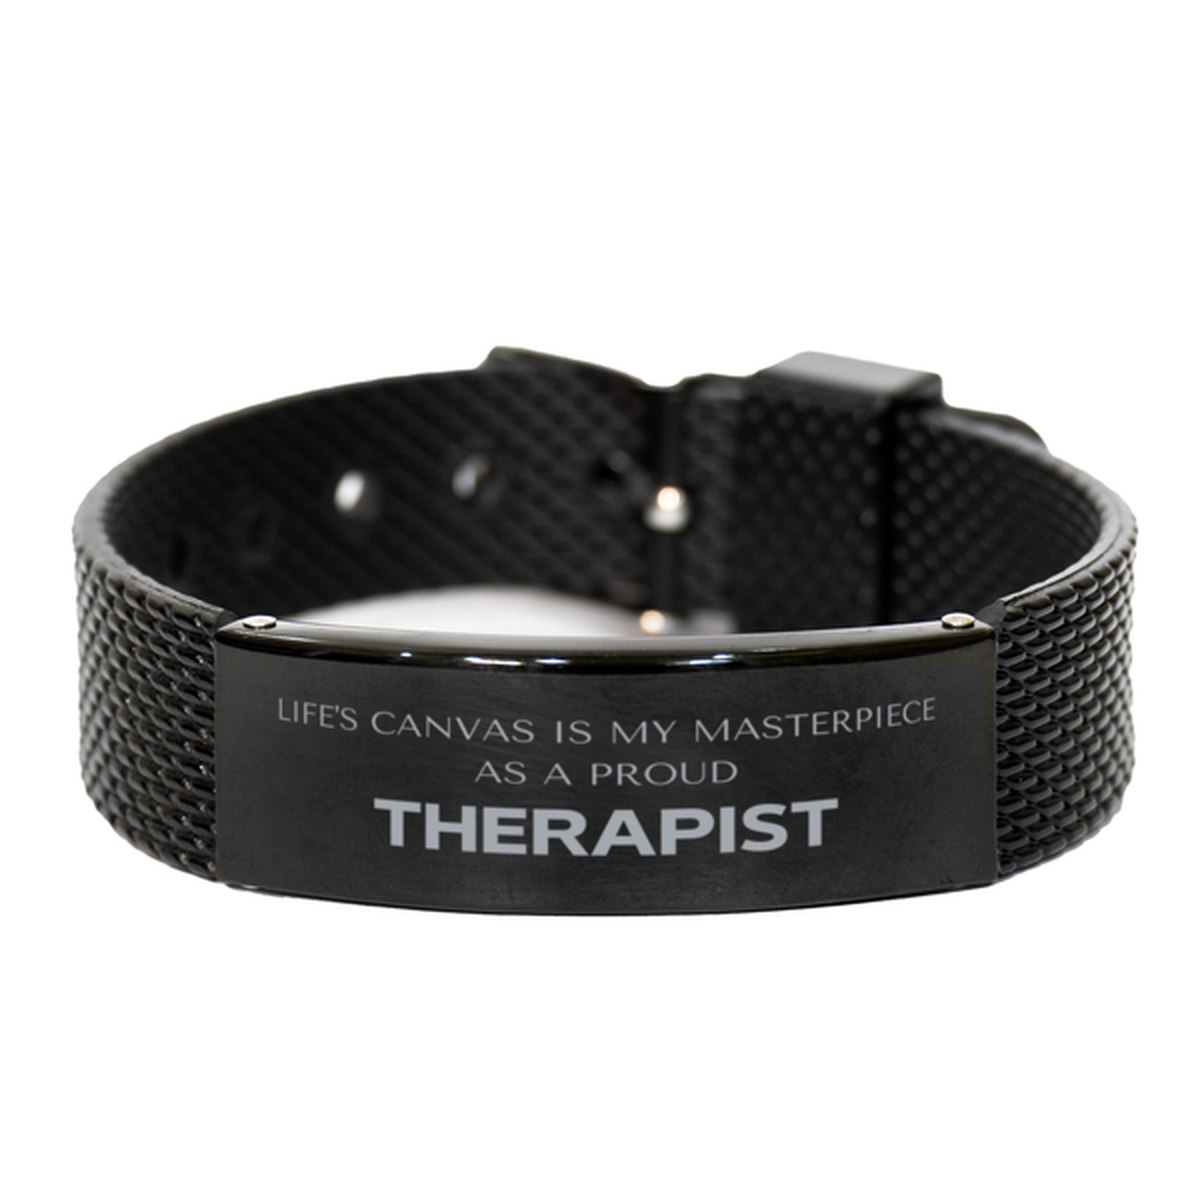 Proud Therapist Gifts, Life's canvas is my masterpiece, Epic Birthday Christmas Unique Black Shark Mesh Bracelet For Therapist, Coworkers, Men, Women, Friends